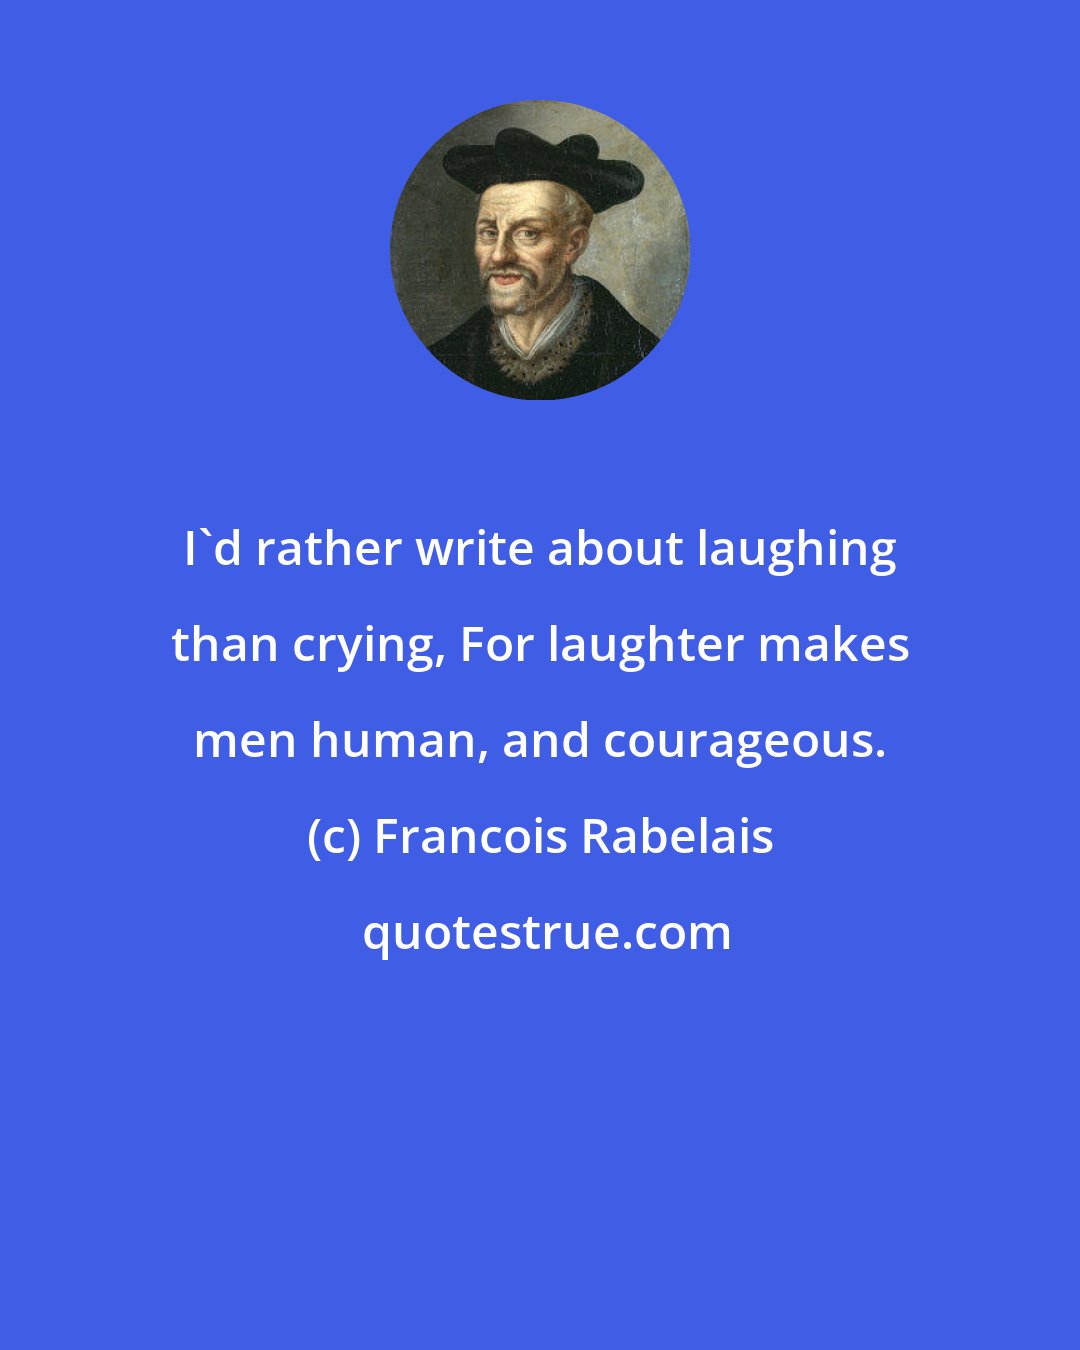 Francois Rabelais: I'd rather write about laughing than crying, For laughter makes men human, and courageous.